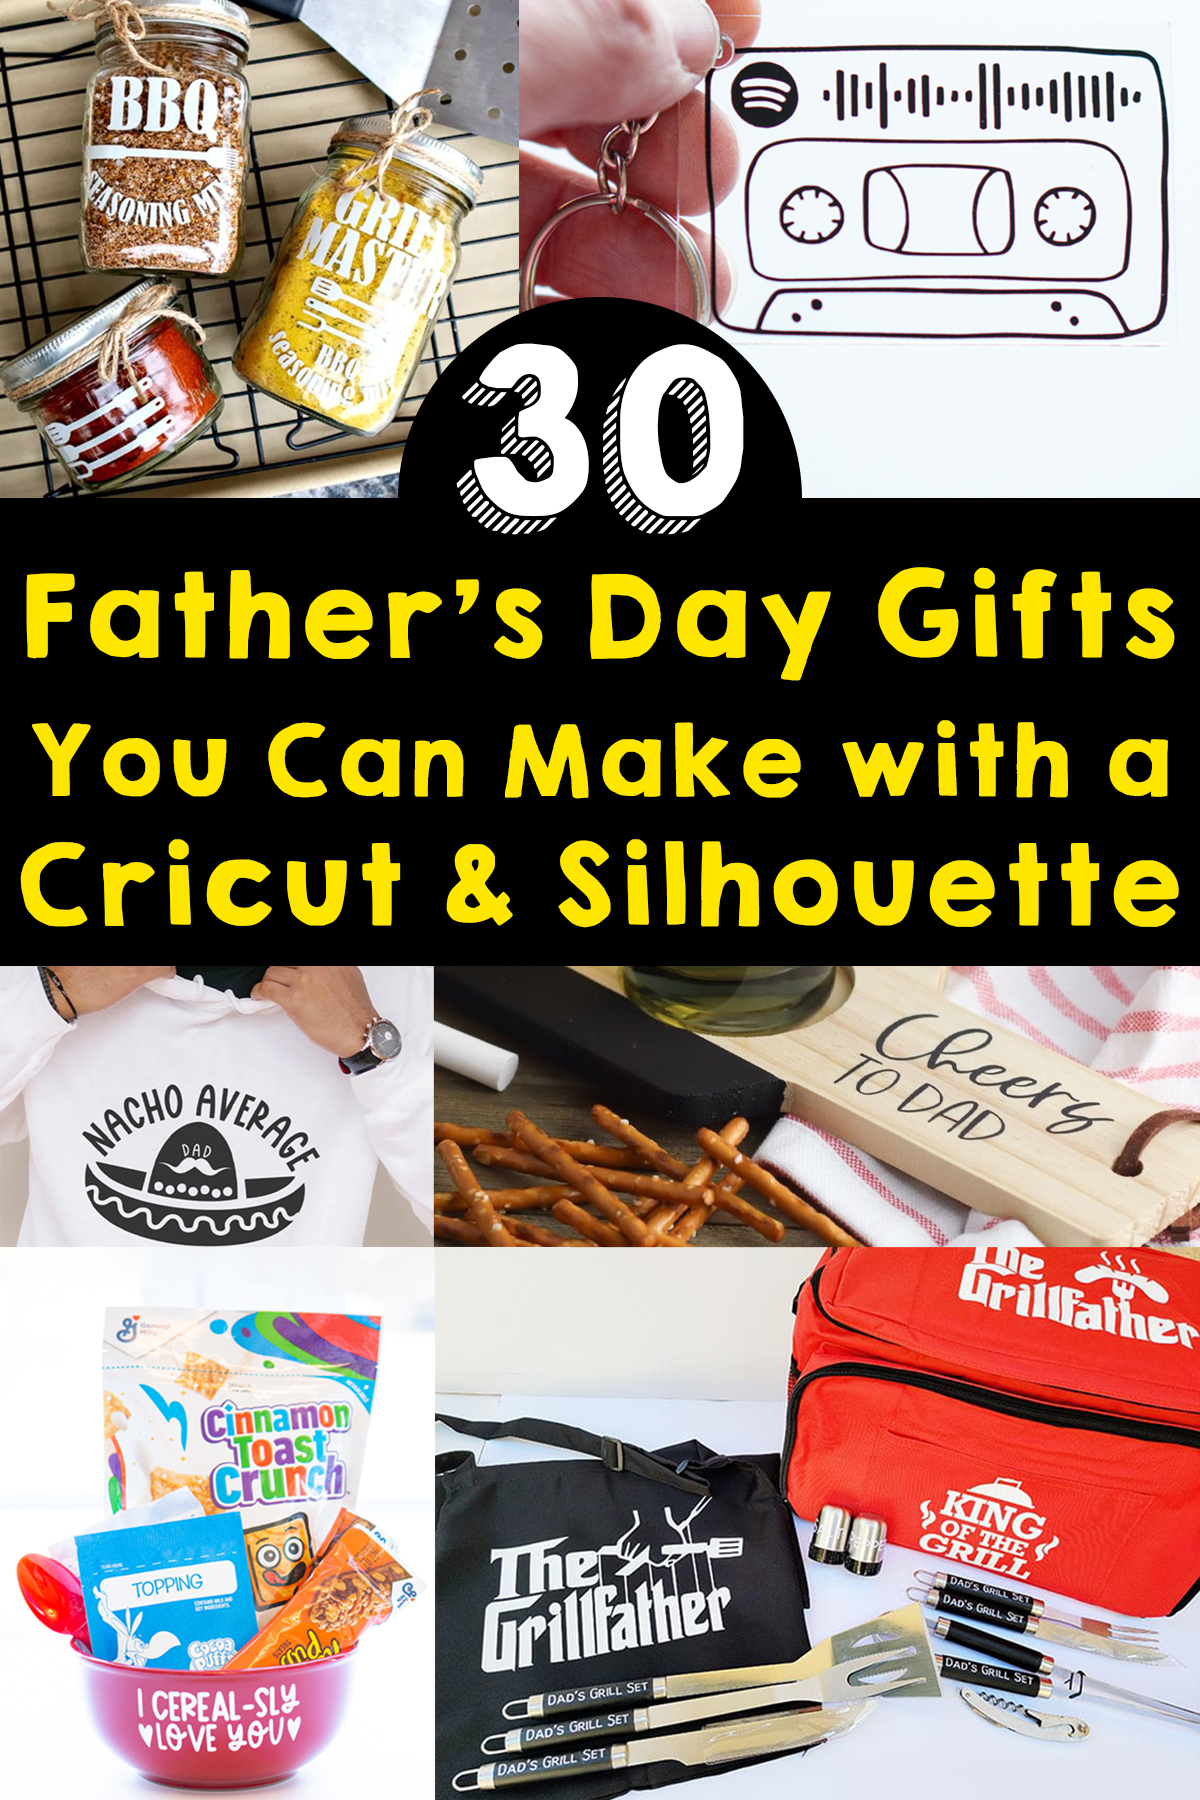 The image says 30 Father's Day gifts you can make with a Cricut & Silhouette. It is surrounded by images of some of the Cricut Fathers Day ideas you can find in this post.